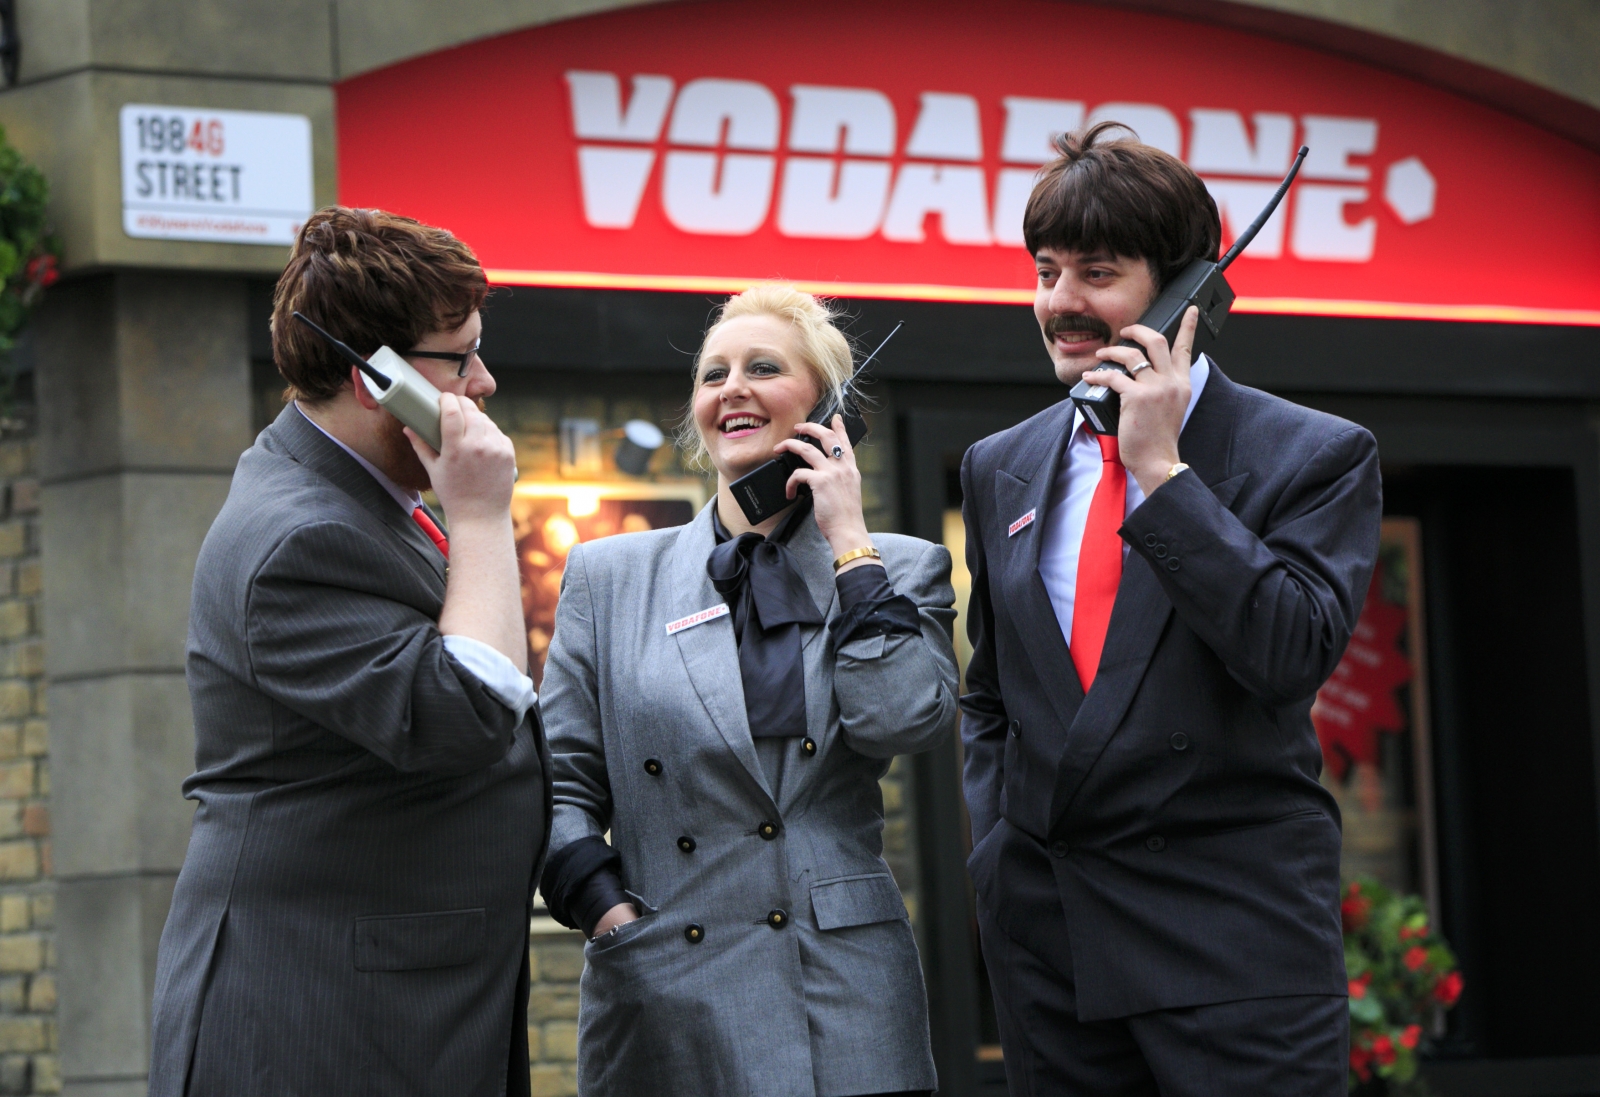 Back to the Future: Vodafone launches 1984G Street to ...